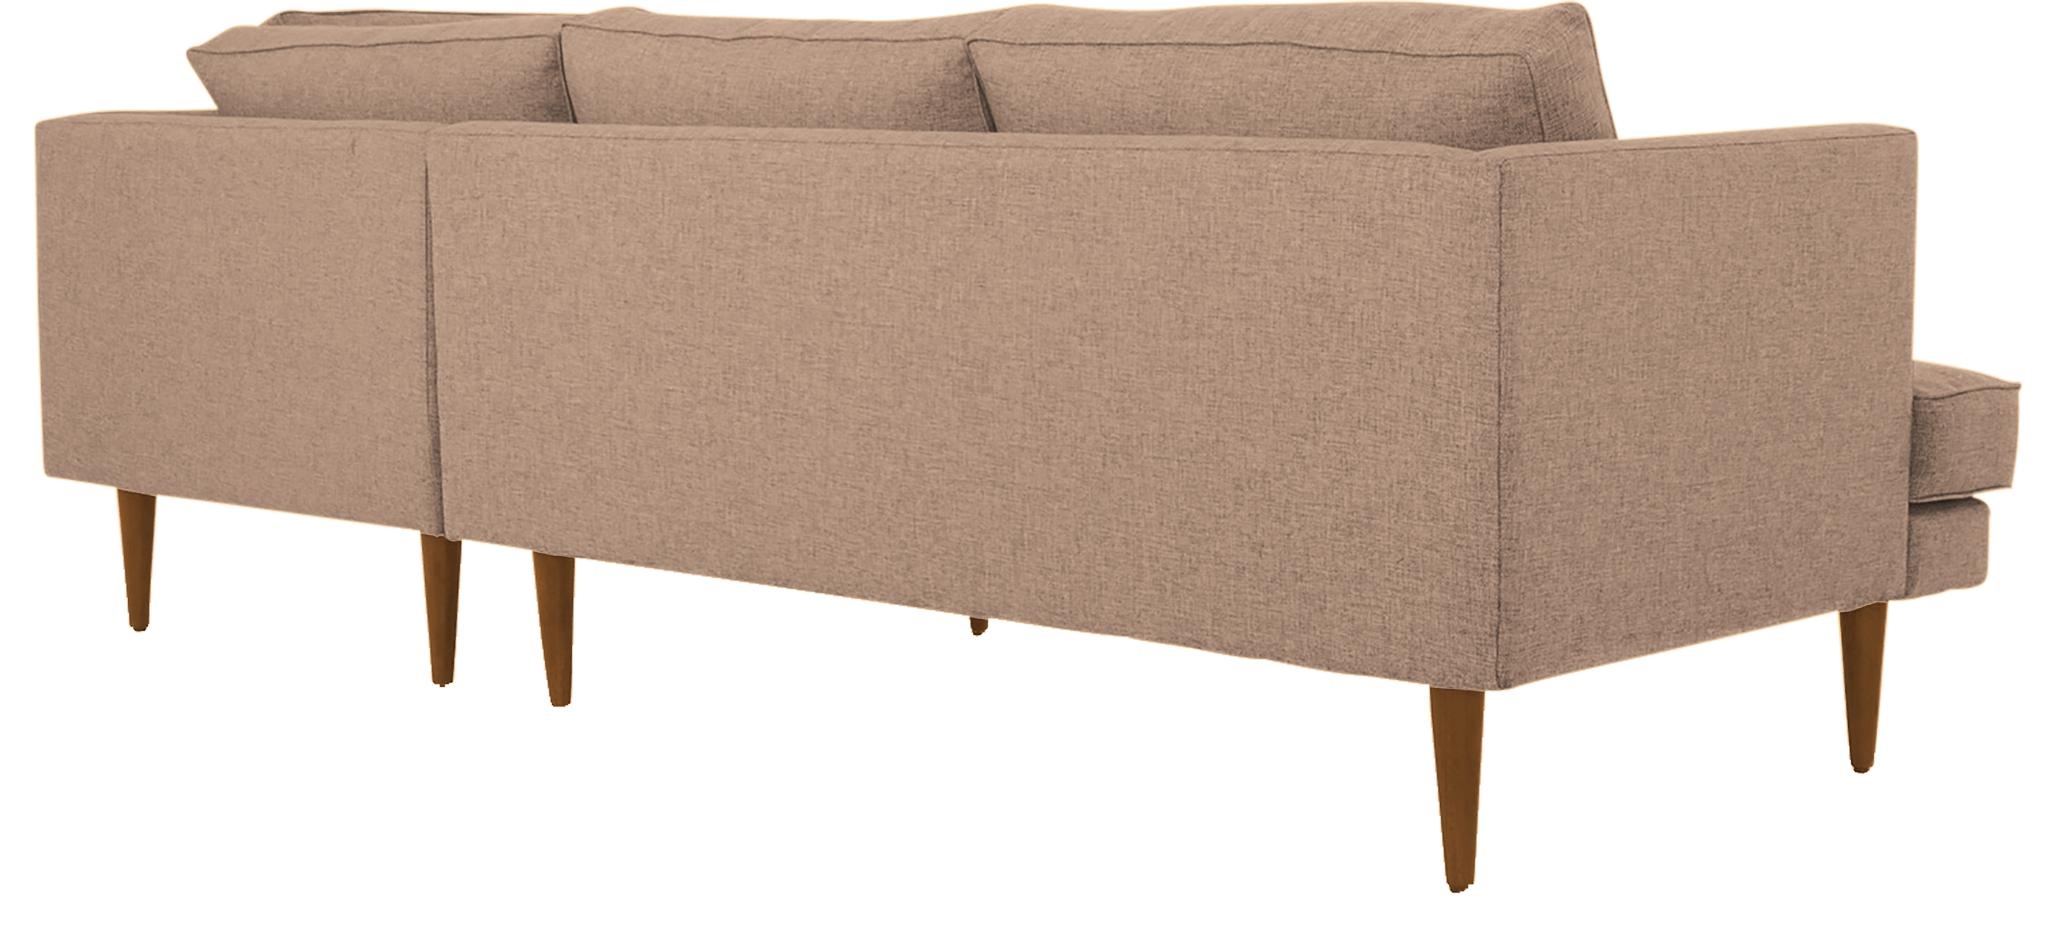 Pink Preston Mid Century Modern Sectional with Bumper (2 piece) - Royale Blush - Mocha - Left - Image 3